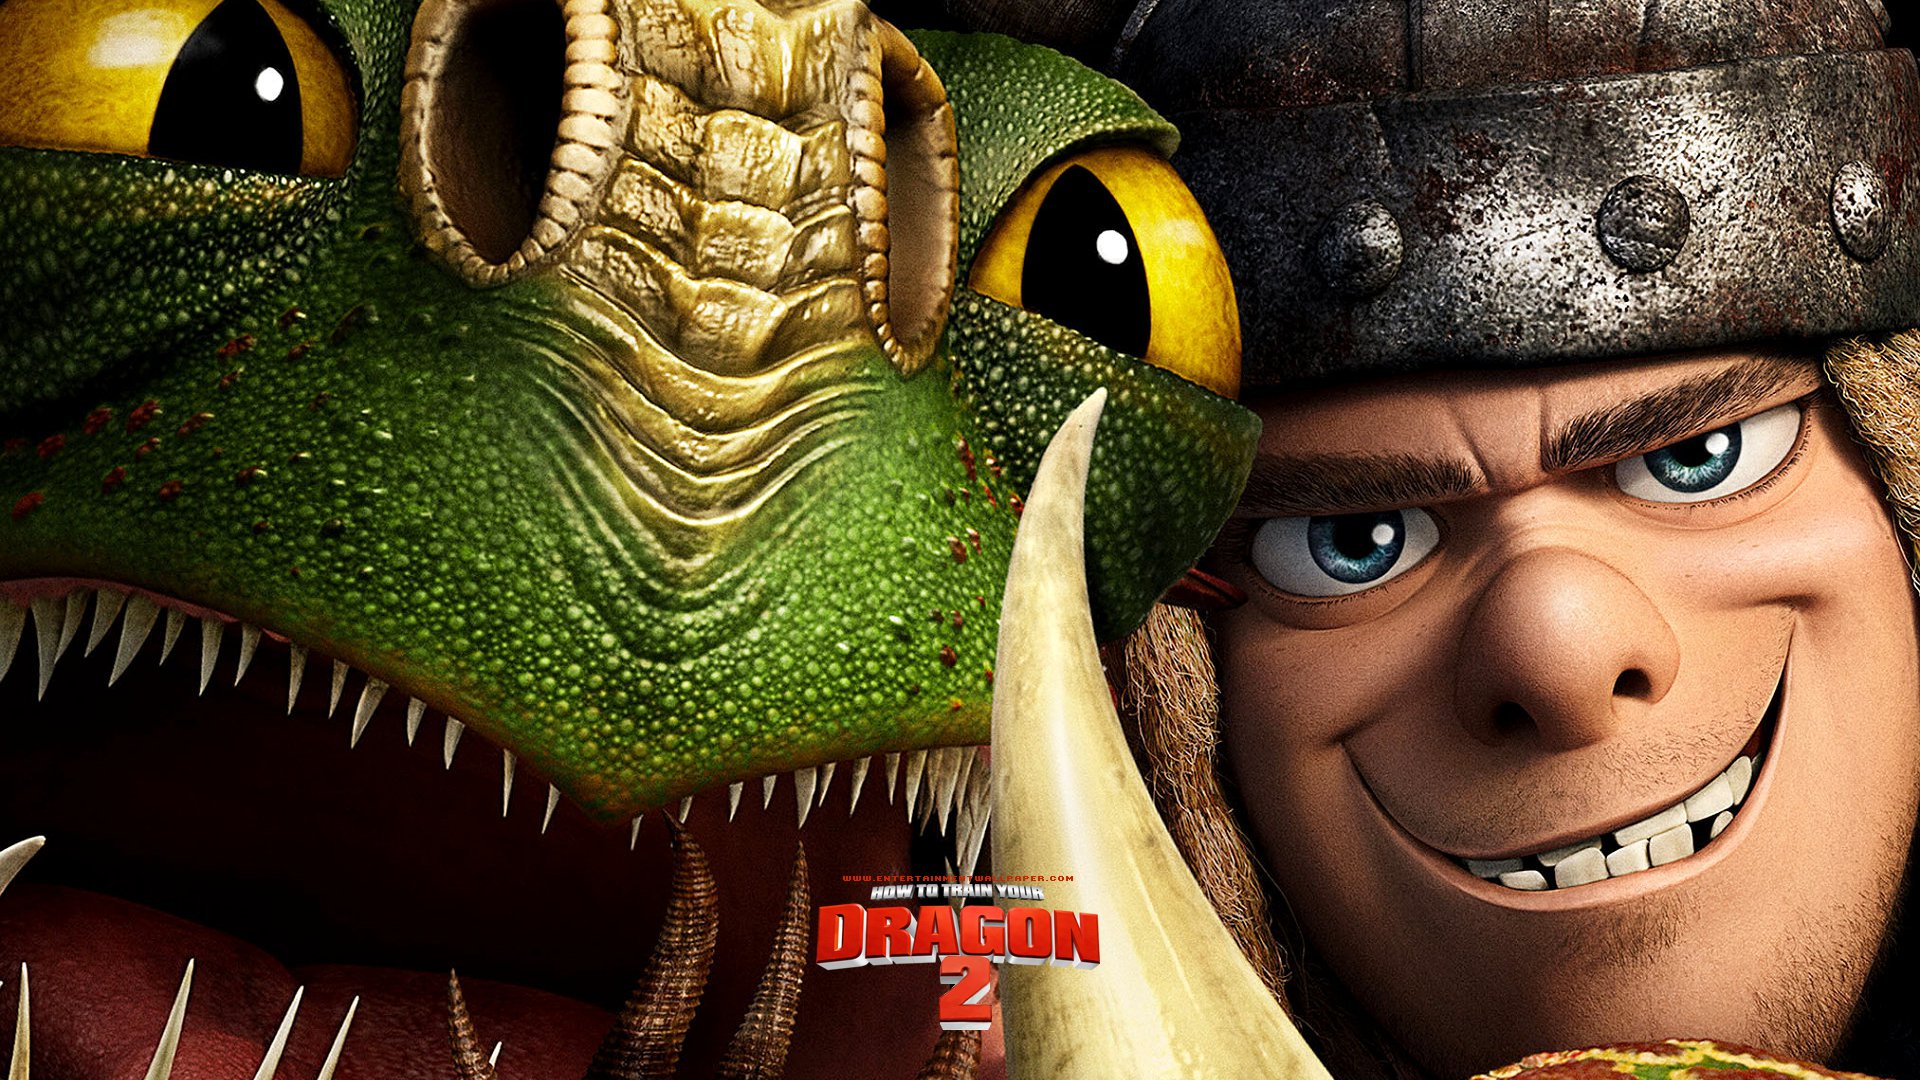 How to Train Your Dragon 2 Poster - Wallpaper, High Definition, High